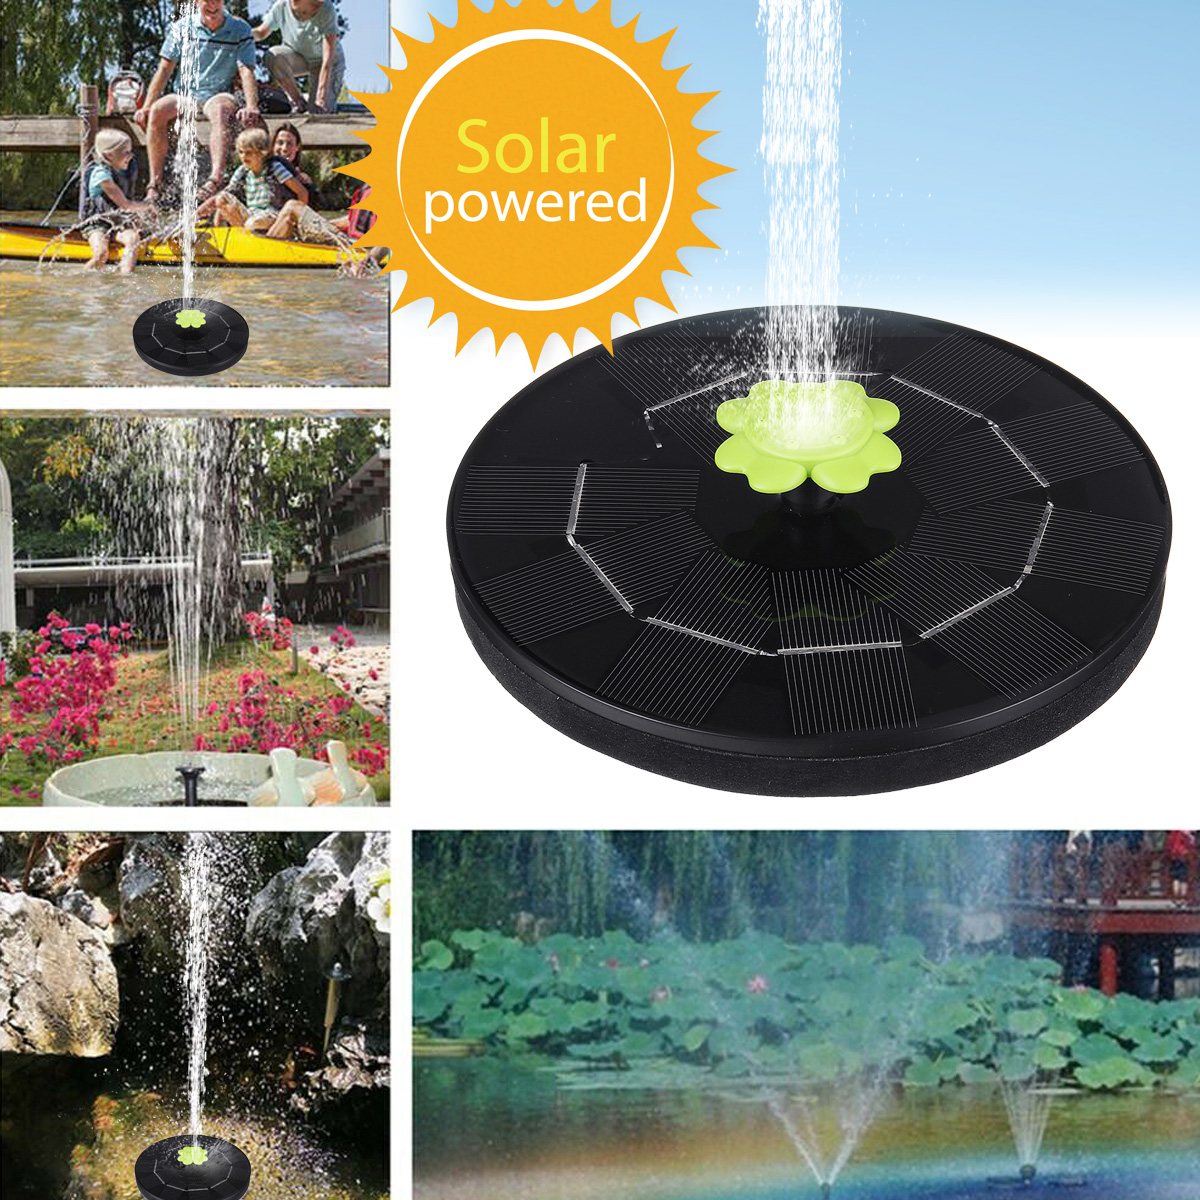 5V-3W-Solar-Powered-Water-Fountain-Pumps-Floating-Fountains-Home-Pond-Garden-Decor-1837061-10